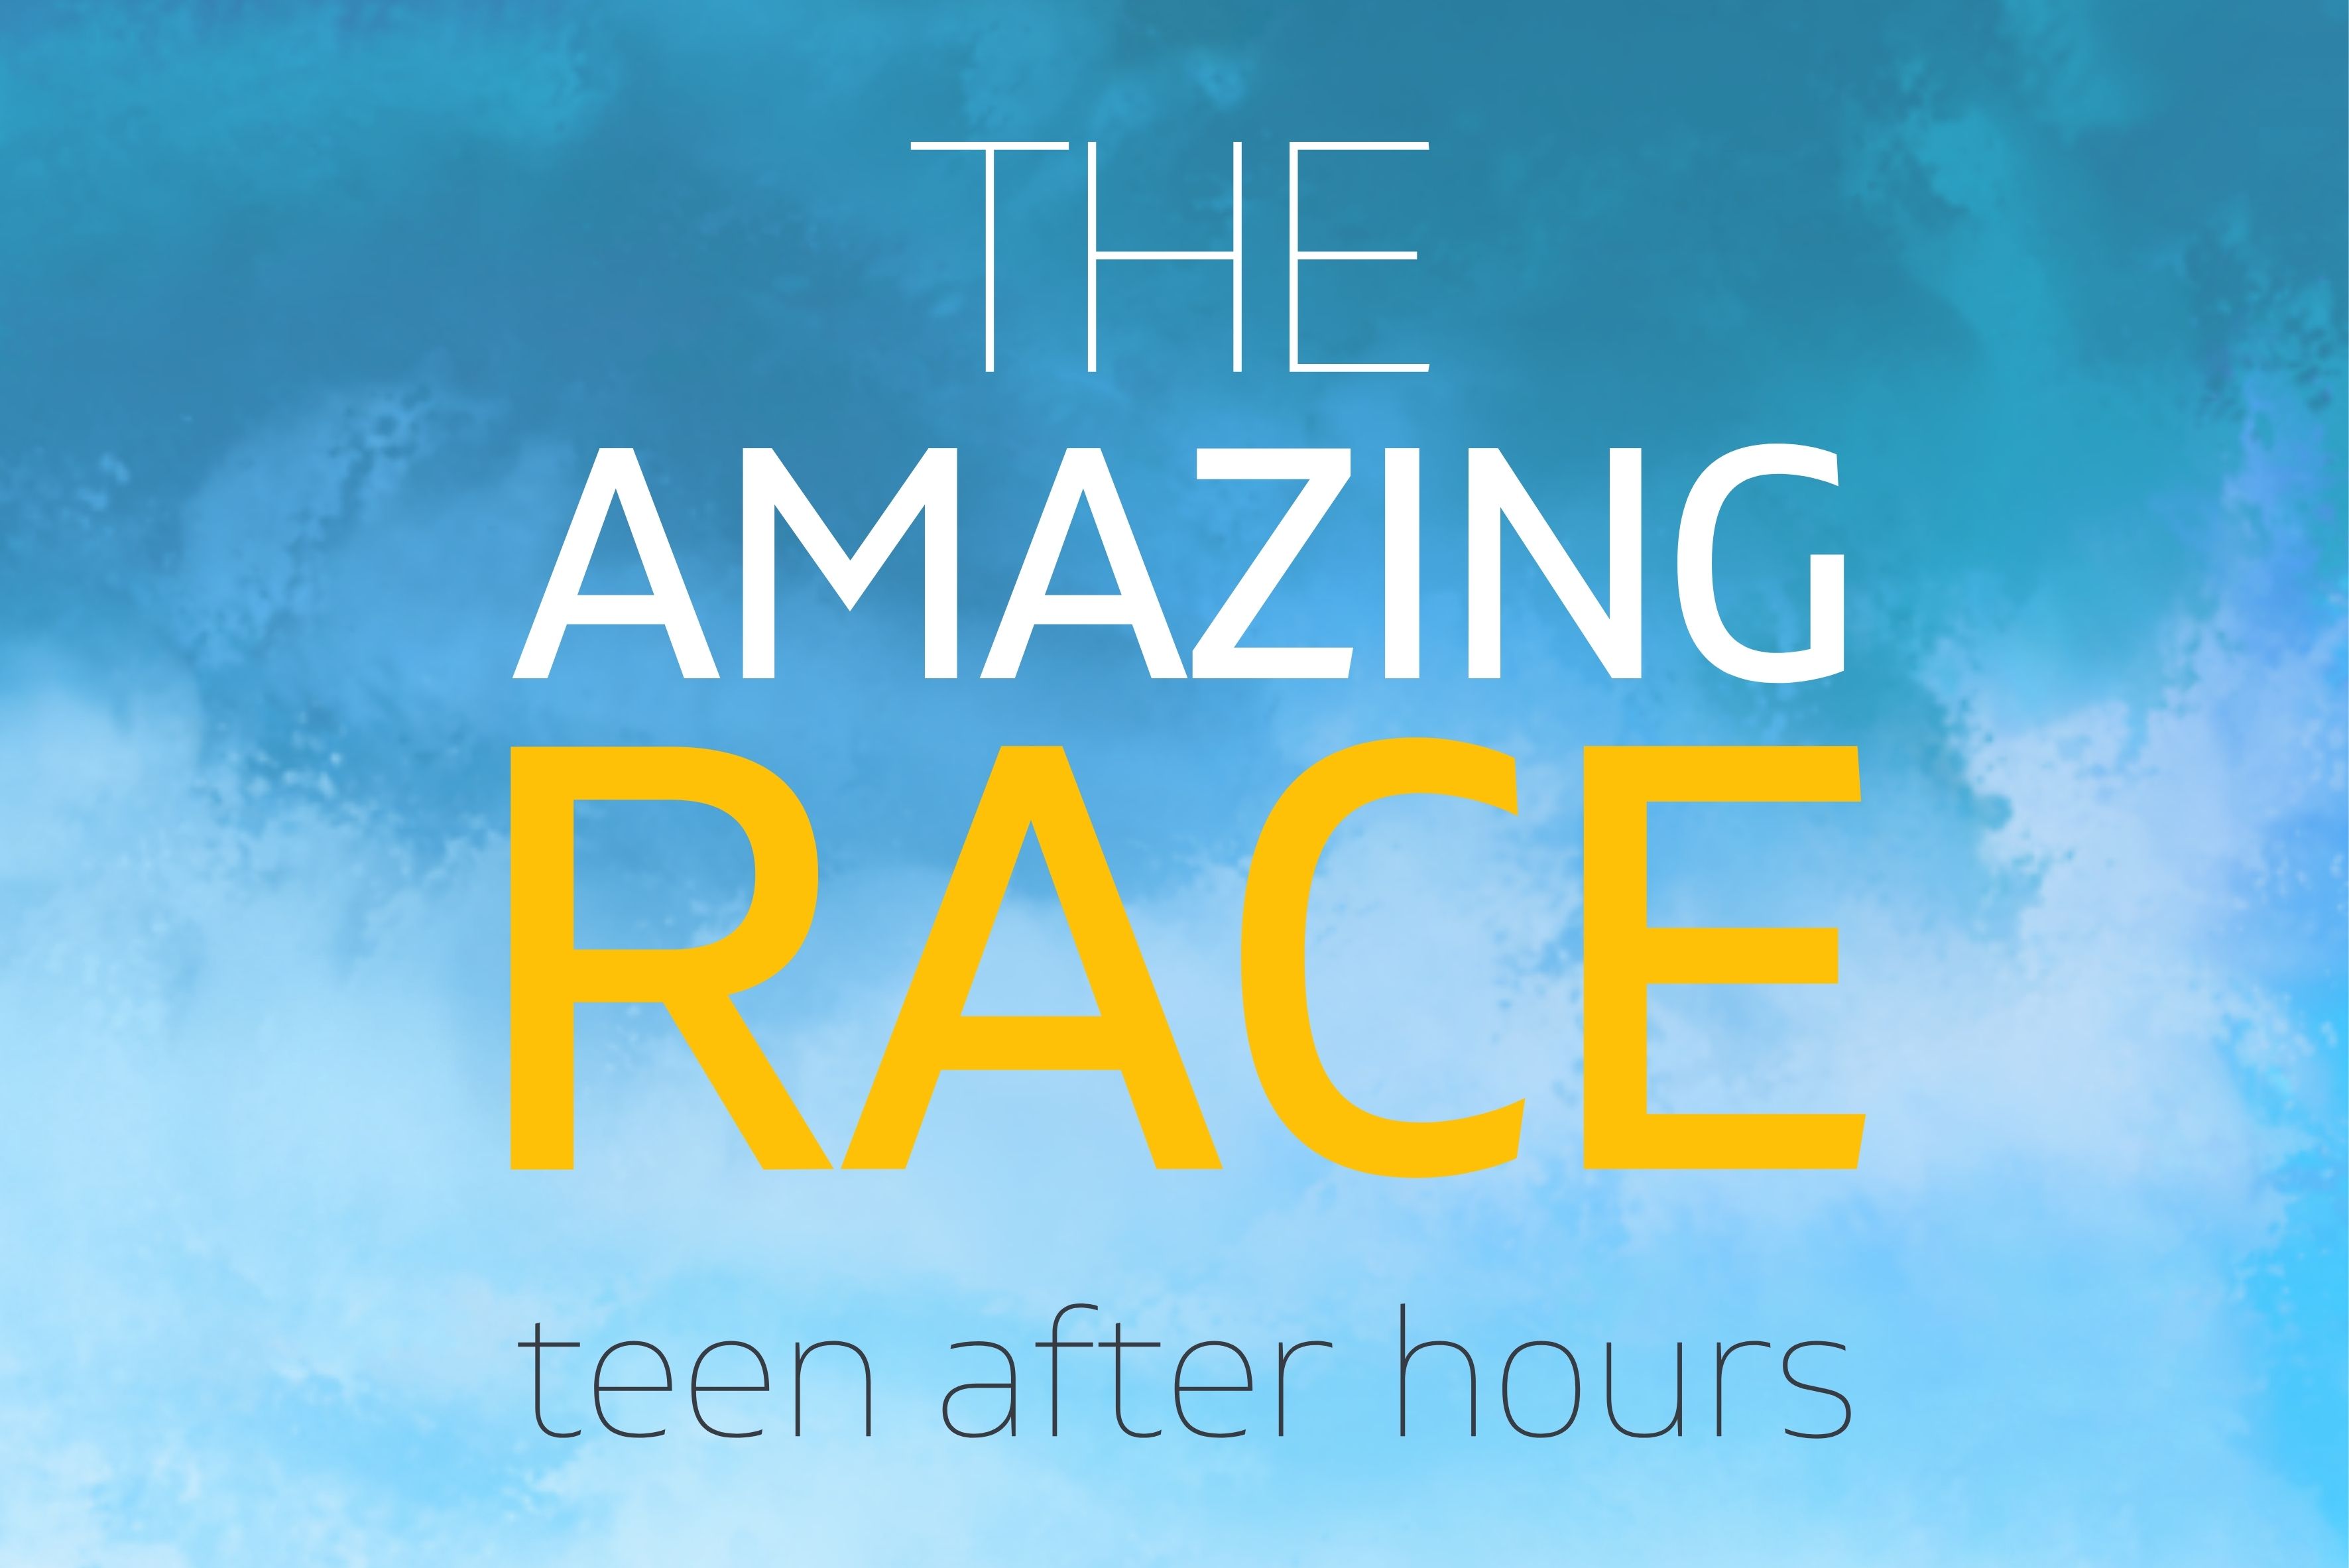 The Amazing Race Teen After Hours text on blue background